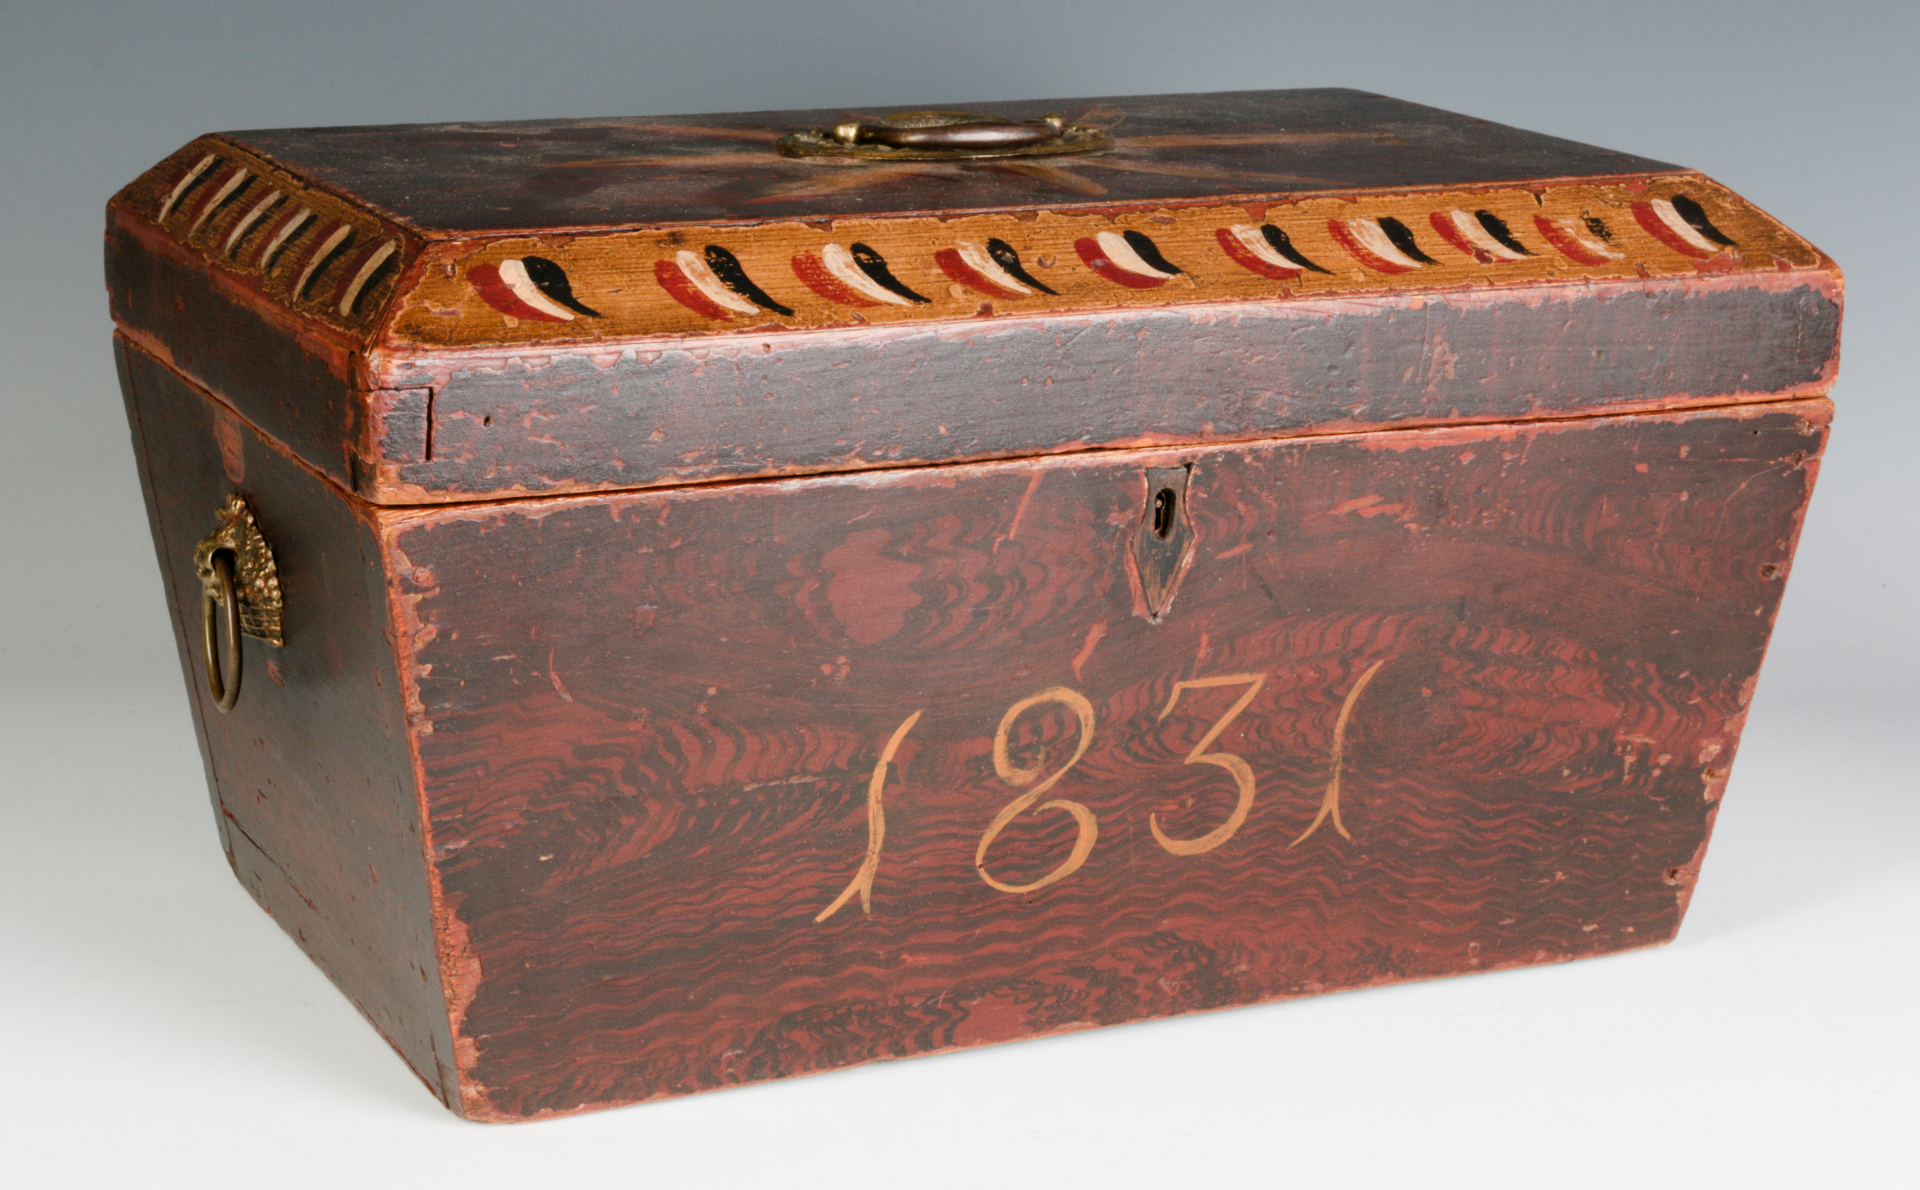 A NICE GRAIN PAINTED DOCUMENT BOX DATED 1831